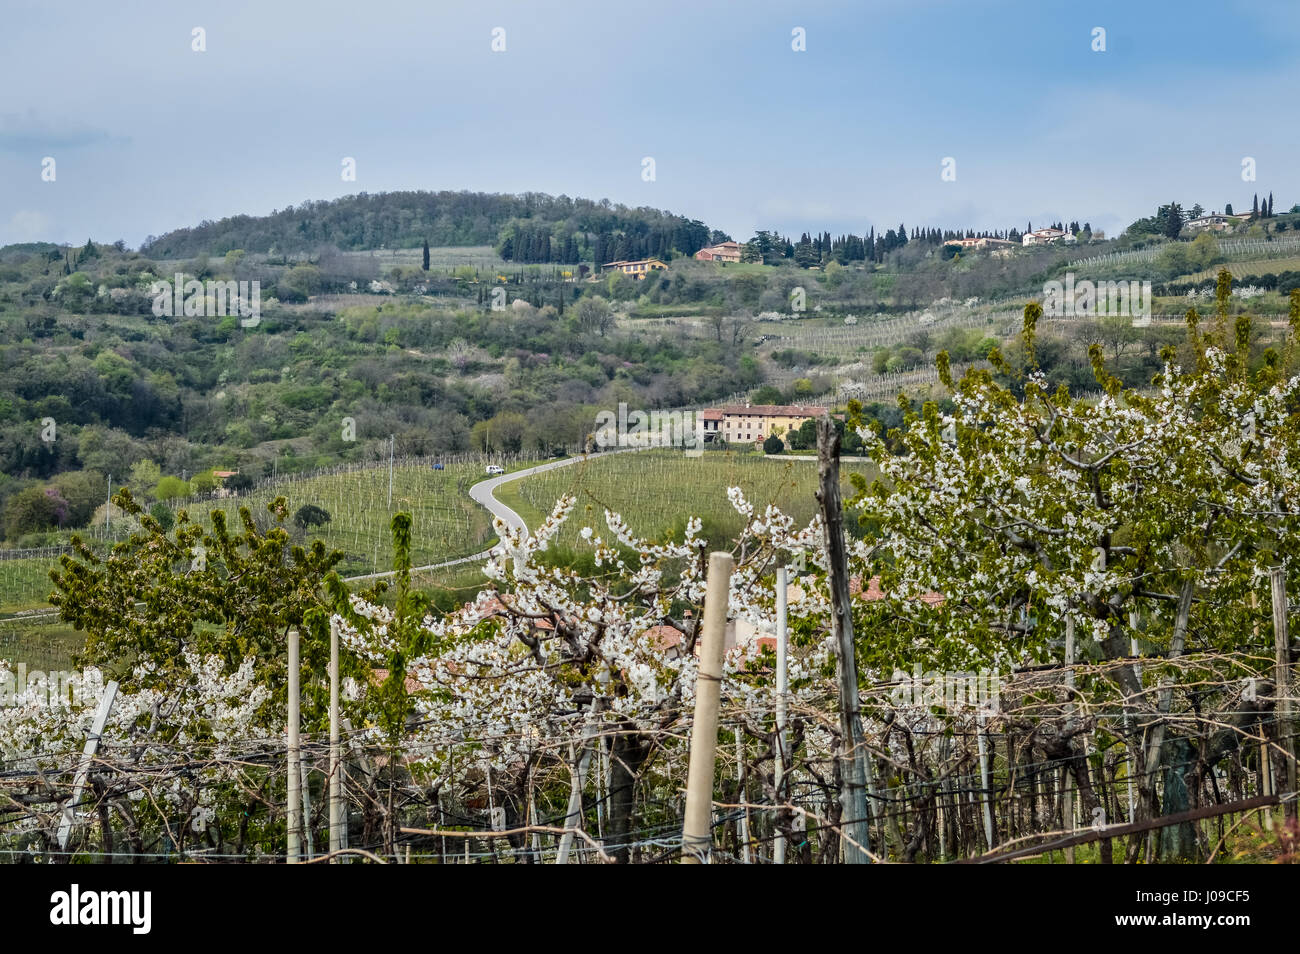 Vineyards on the hills of the Soave area near Verona in northern Italy, Soave is also a famous white italian wine. Stock Photo